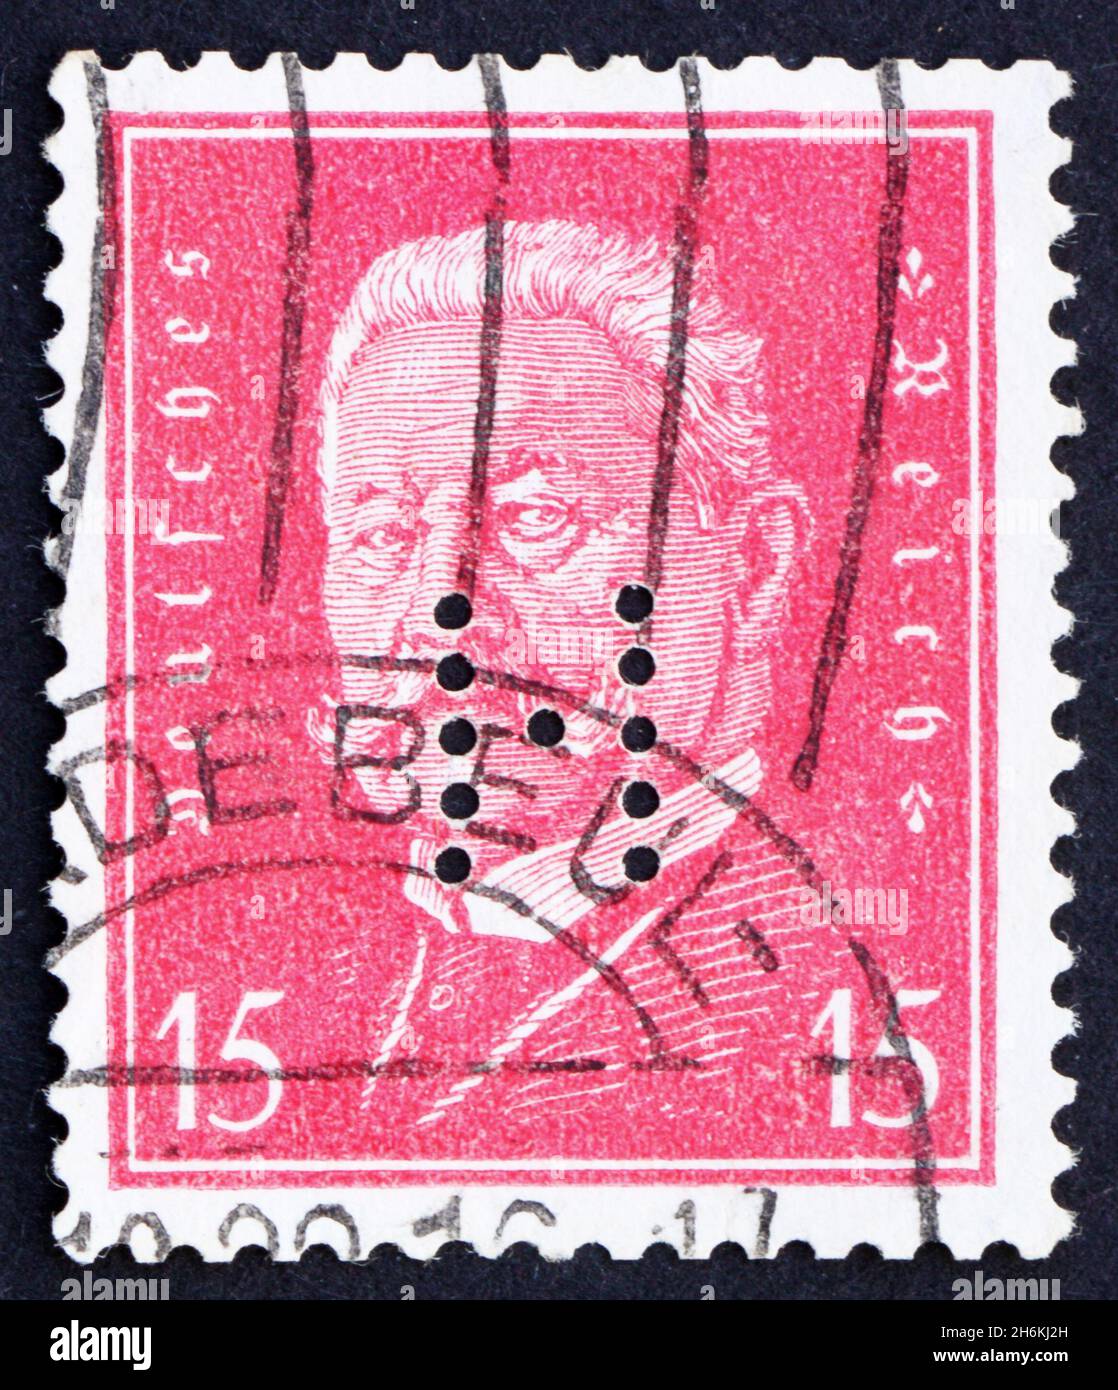 GERMANY - CIRCA 1928: a stamp printed in the Germany shows Paul von Hindenburg, 2nd President of the German Reich, circa 1928 Stock Photo